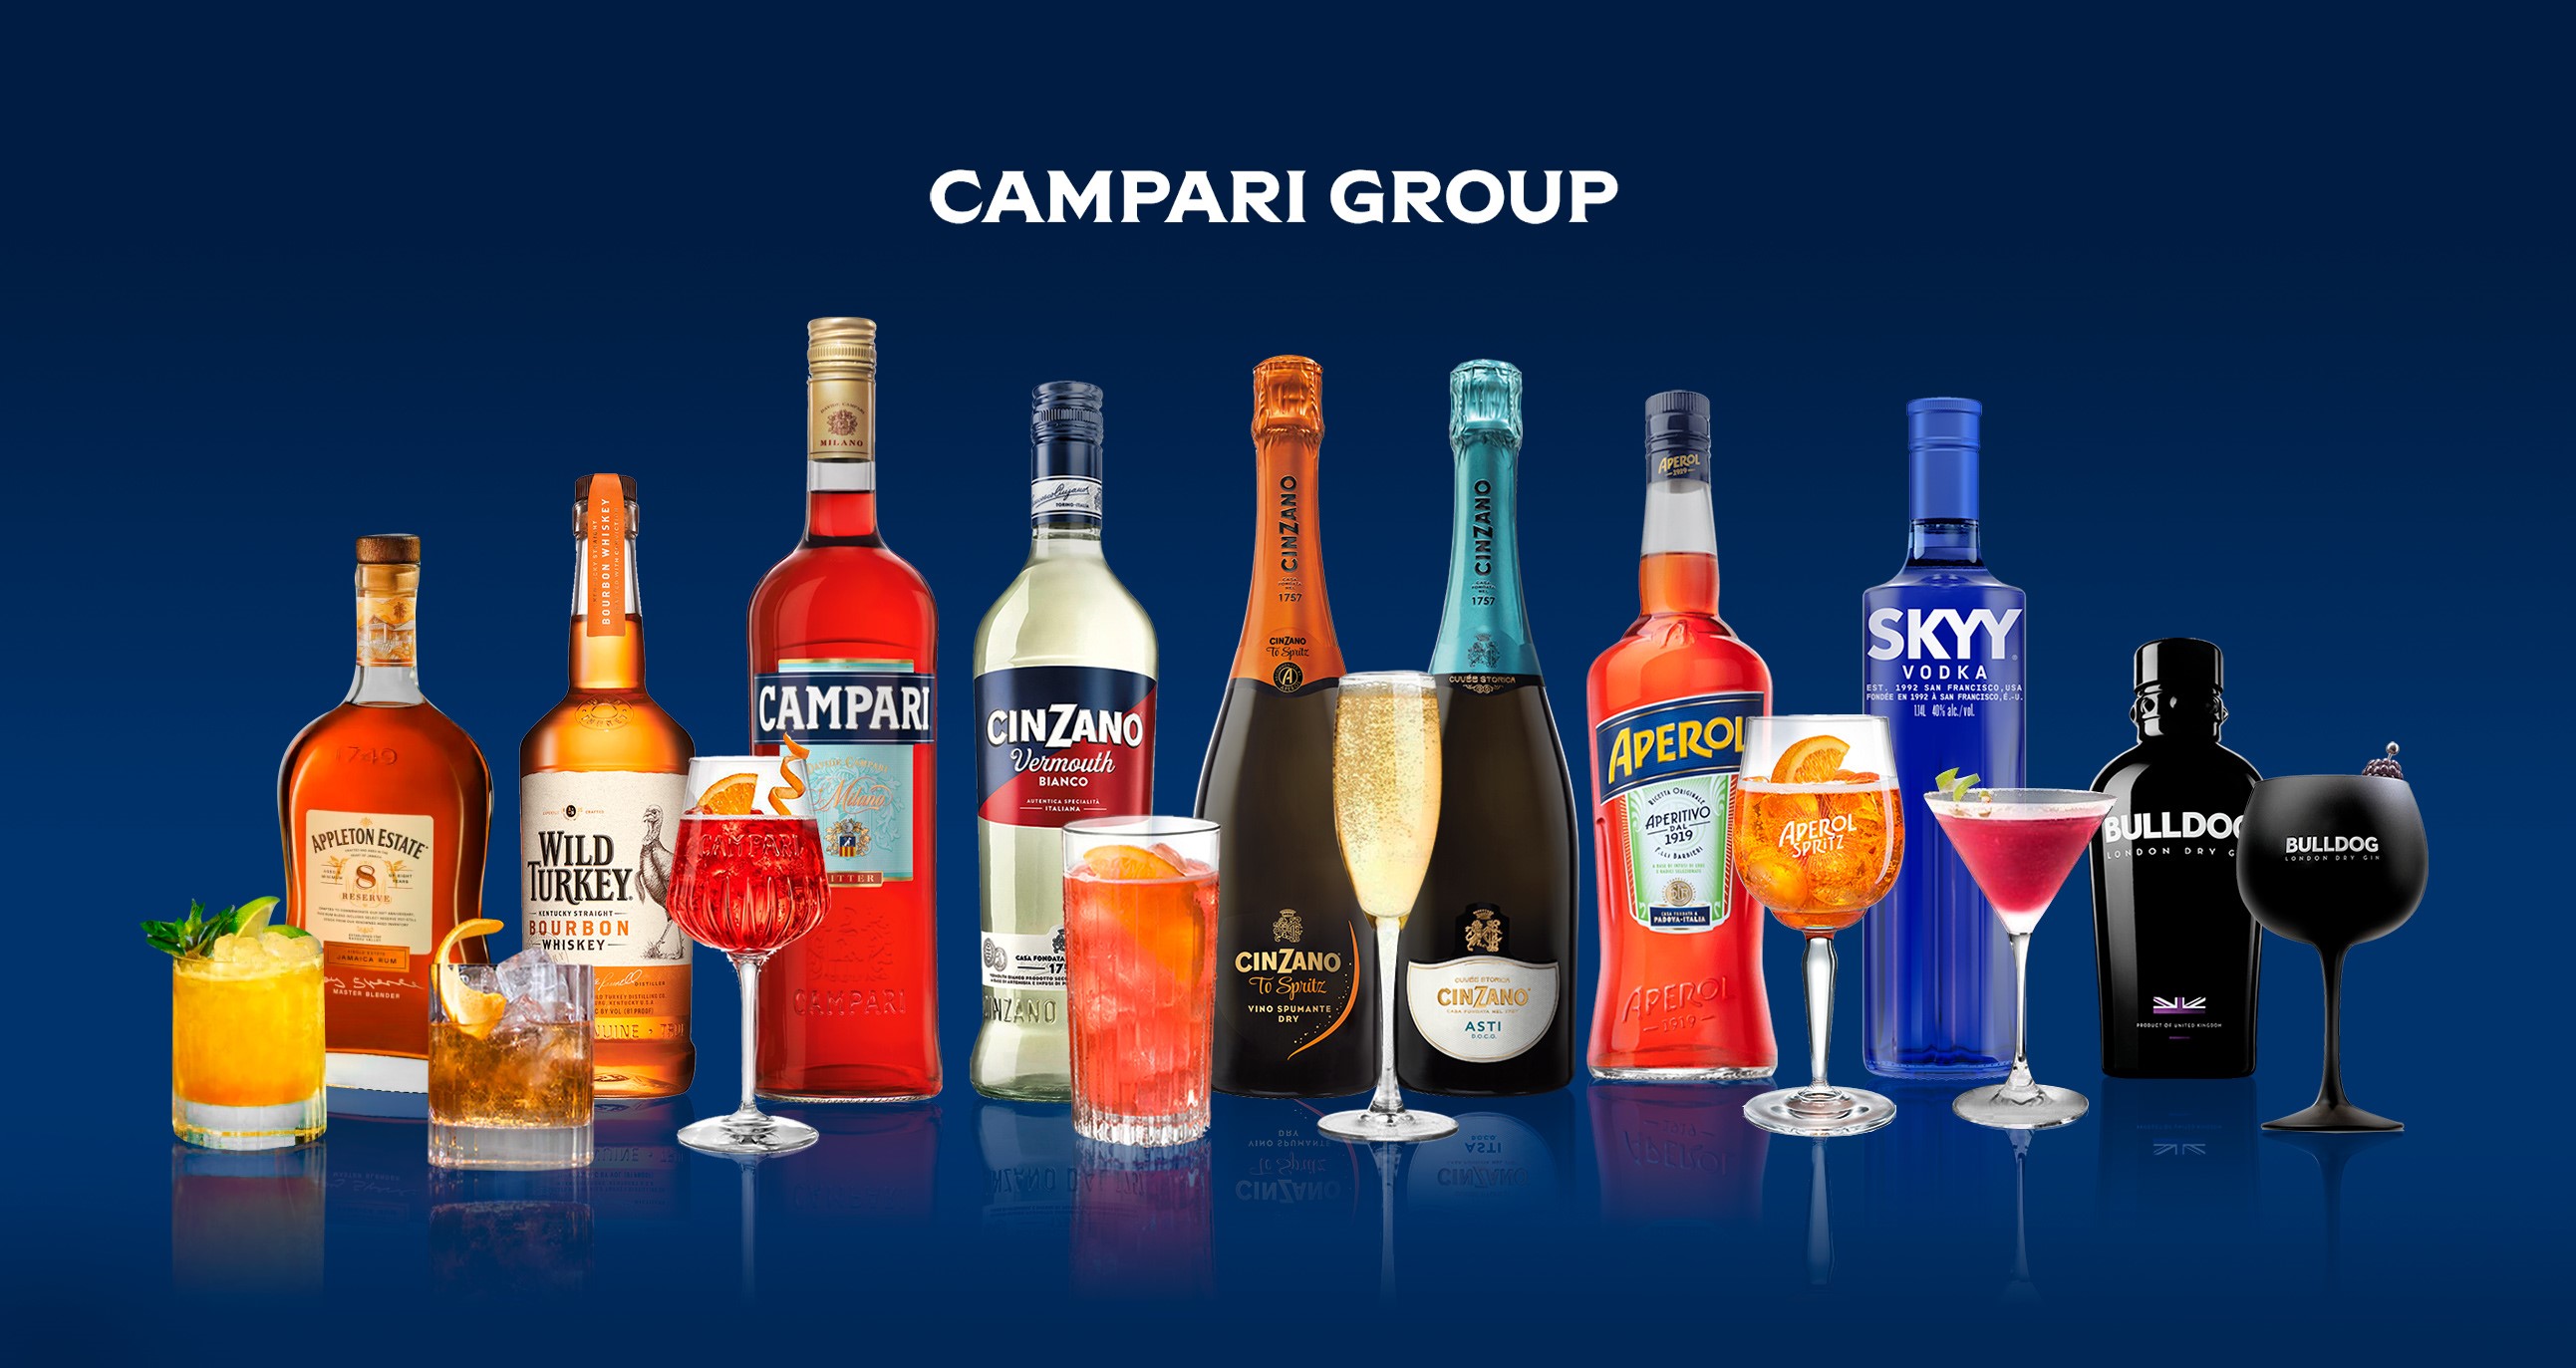 DP Drinks Appointed new Exclusive Distributor of the Campari Group Portfolio in Hungary